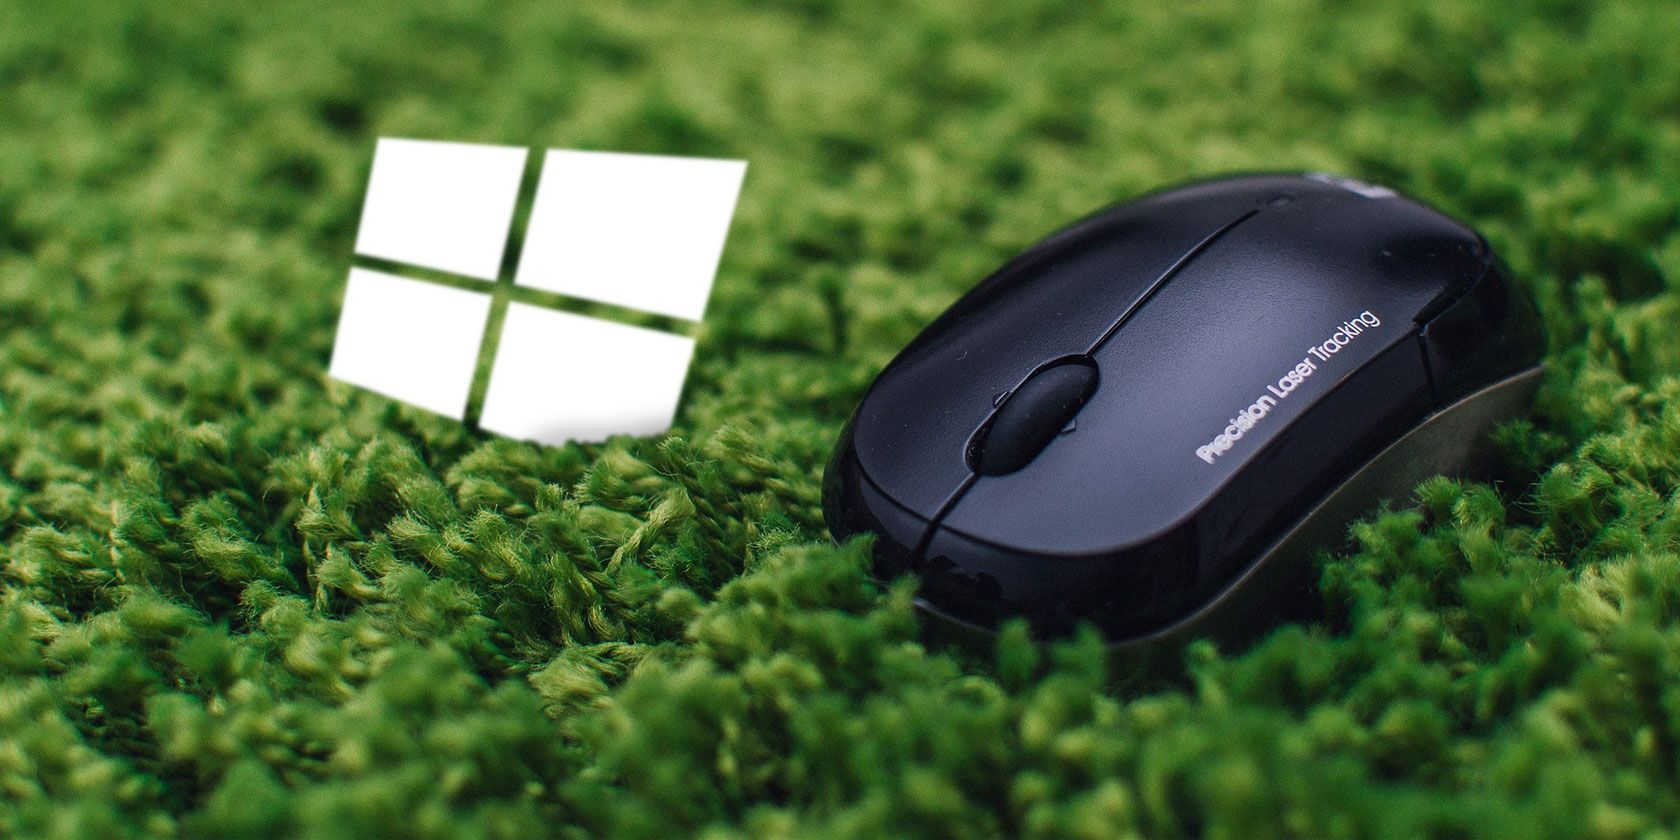 Wireless mouse and Windows logo on a green carpet